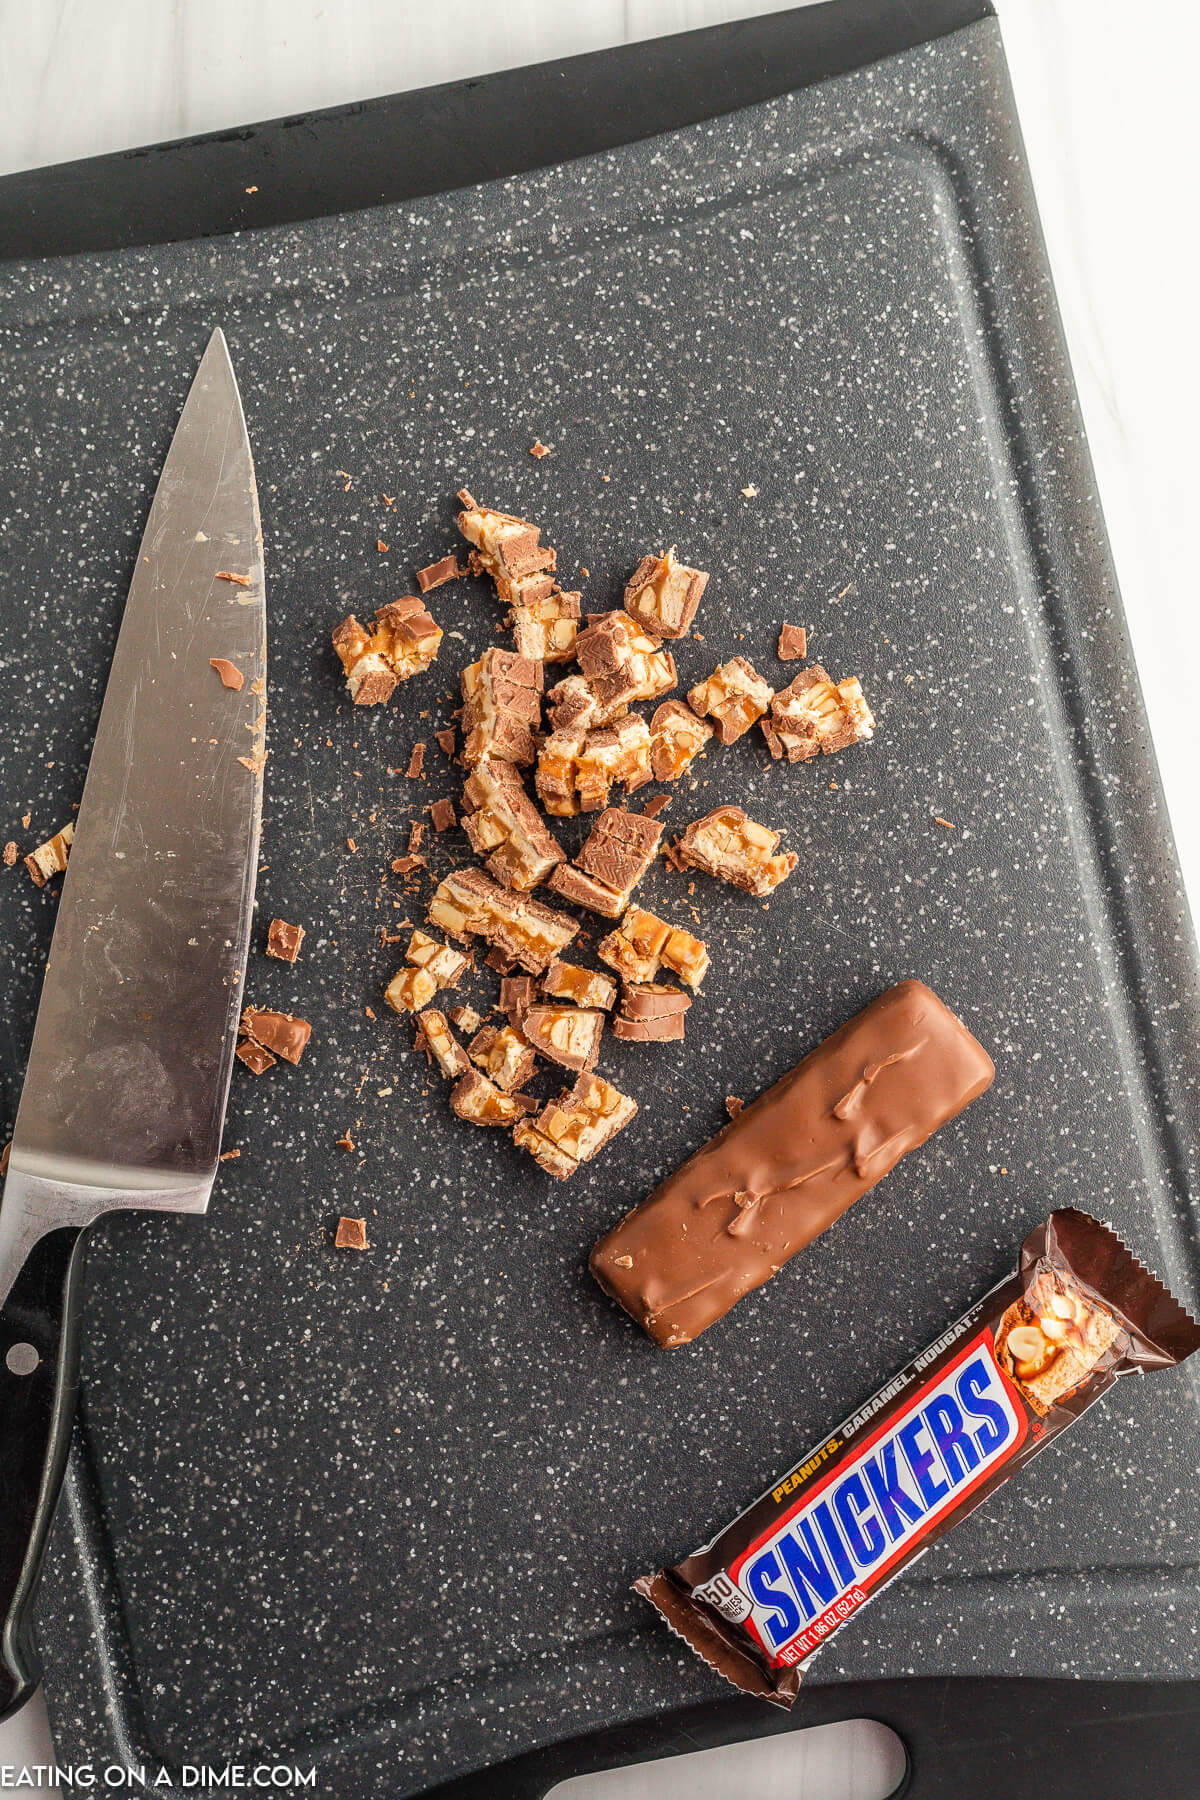 Chopping the Snickers Bars into bite size pieces on a cutting board